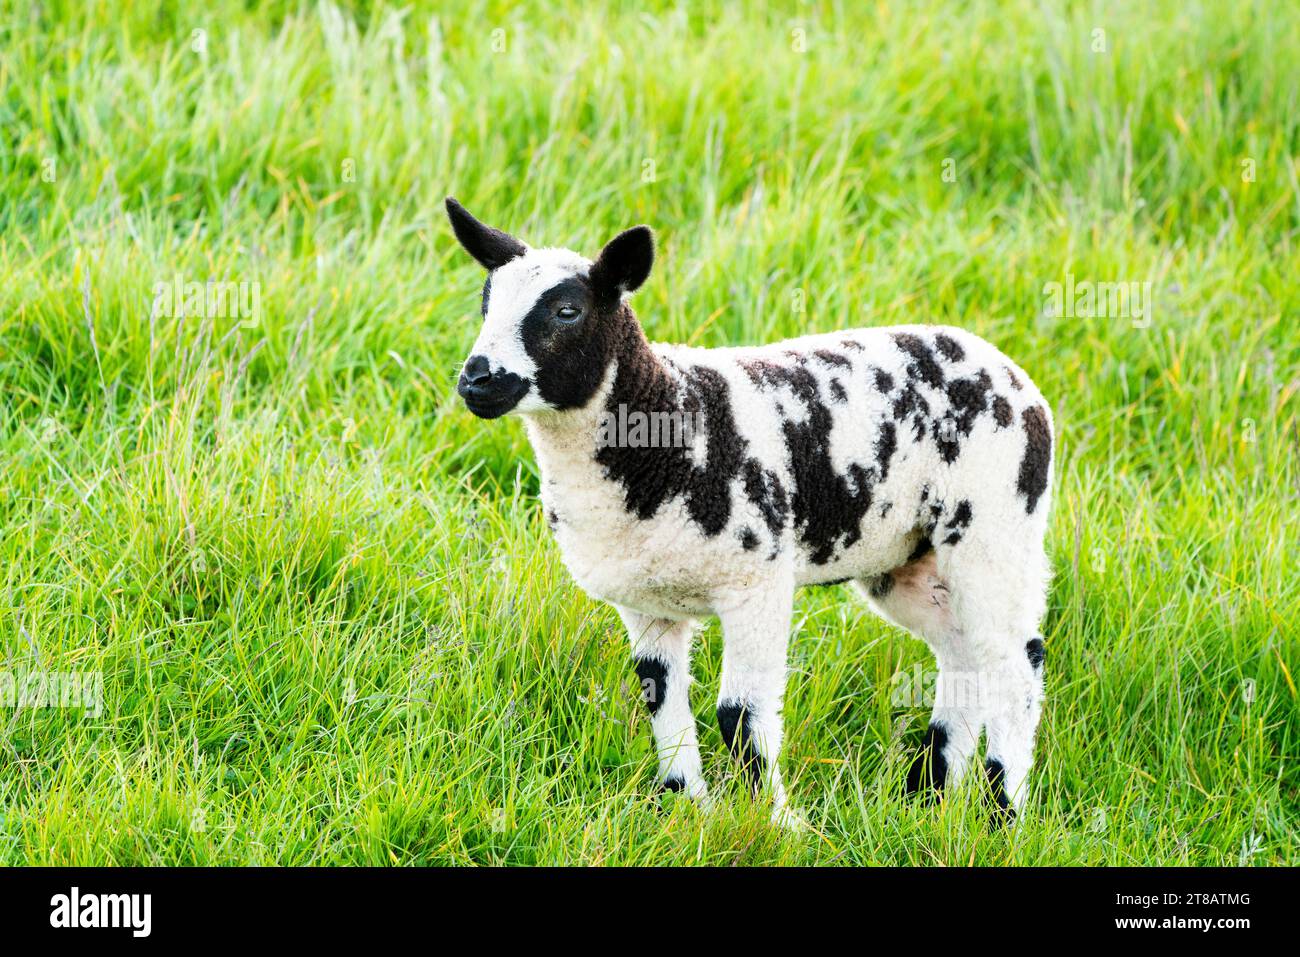 On the meadow in nature there is a beautiful young lamb Stock Photo